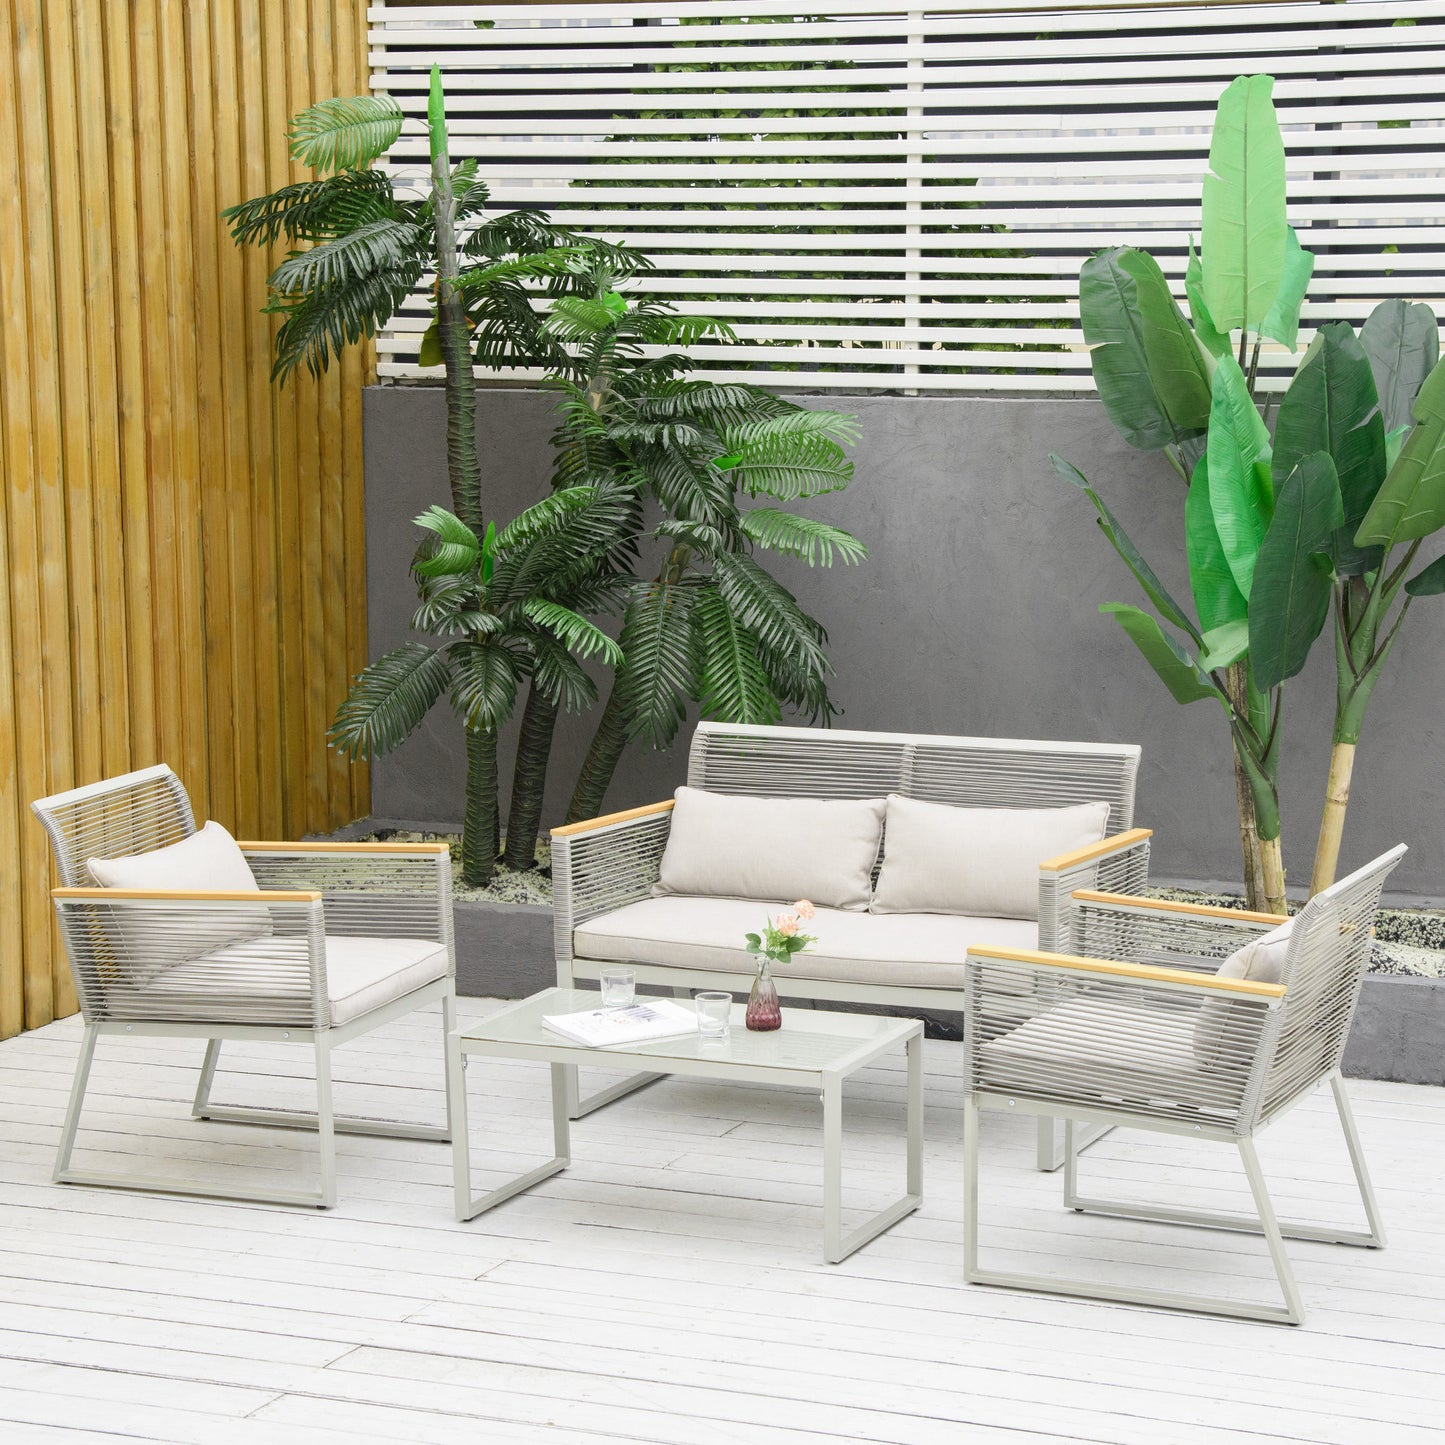 Outsunny 4-Seater Patio Wicker Sofa Set, Outdoor Metal Frame Wrapped Round PE Rattan Conservatory Furniture w/ Cushions, Tempered Glass Table, Grey